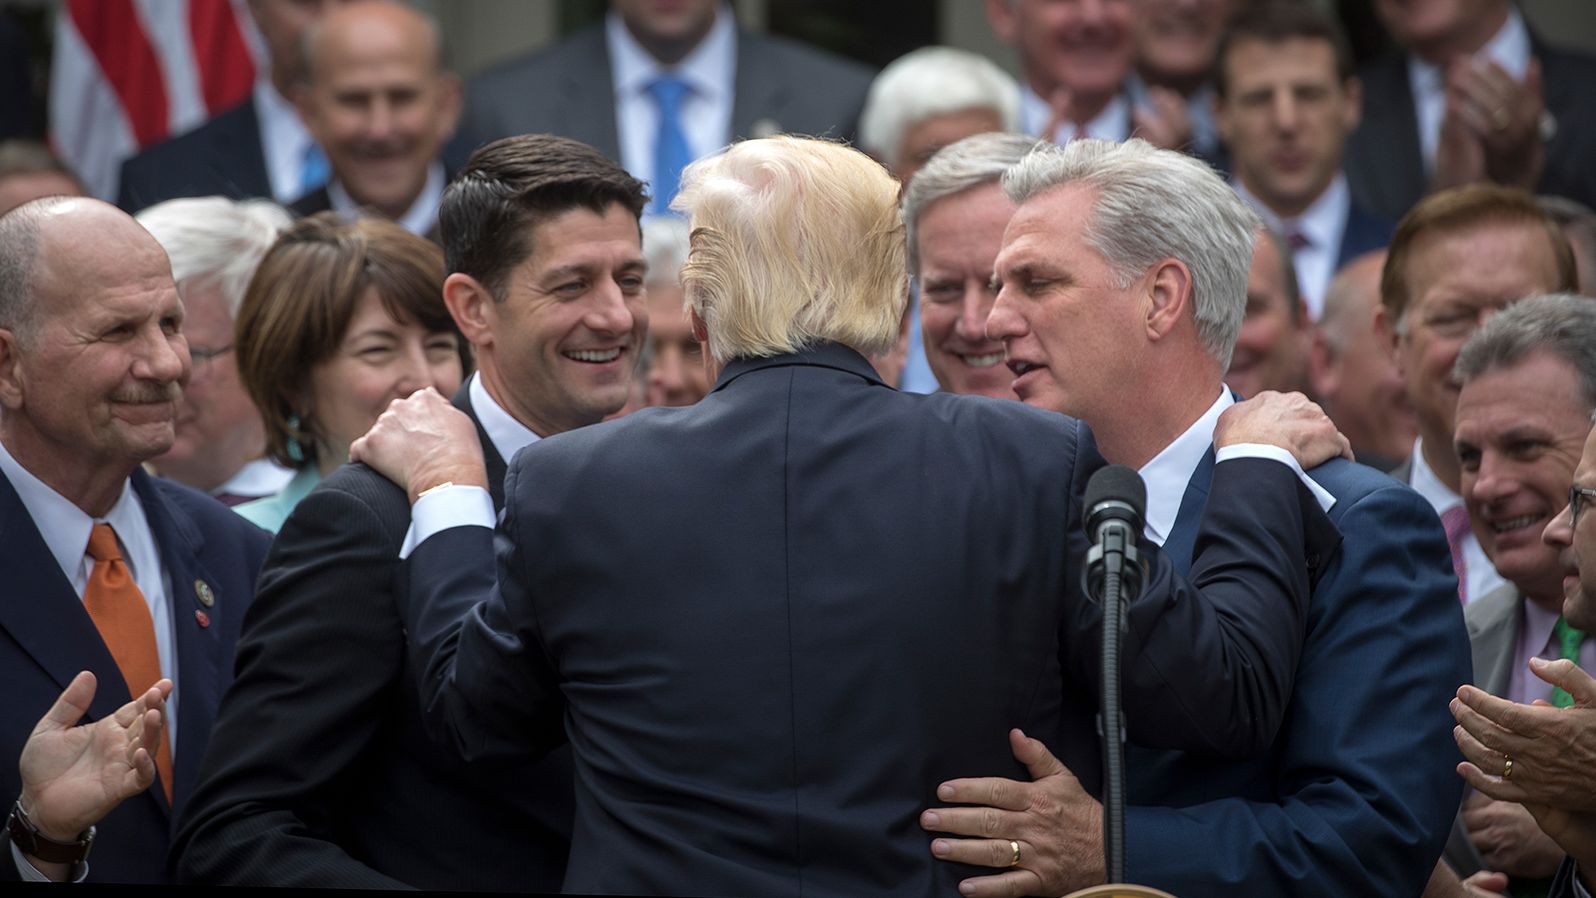 Trump rests his hands on the shoulders of Ryan and McCarthy as Republican leaders celebrated the House's passage of the American Health Care Act in May 2017. The bill failed to make it through the Senate.